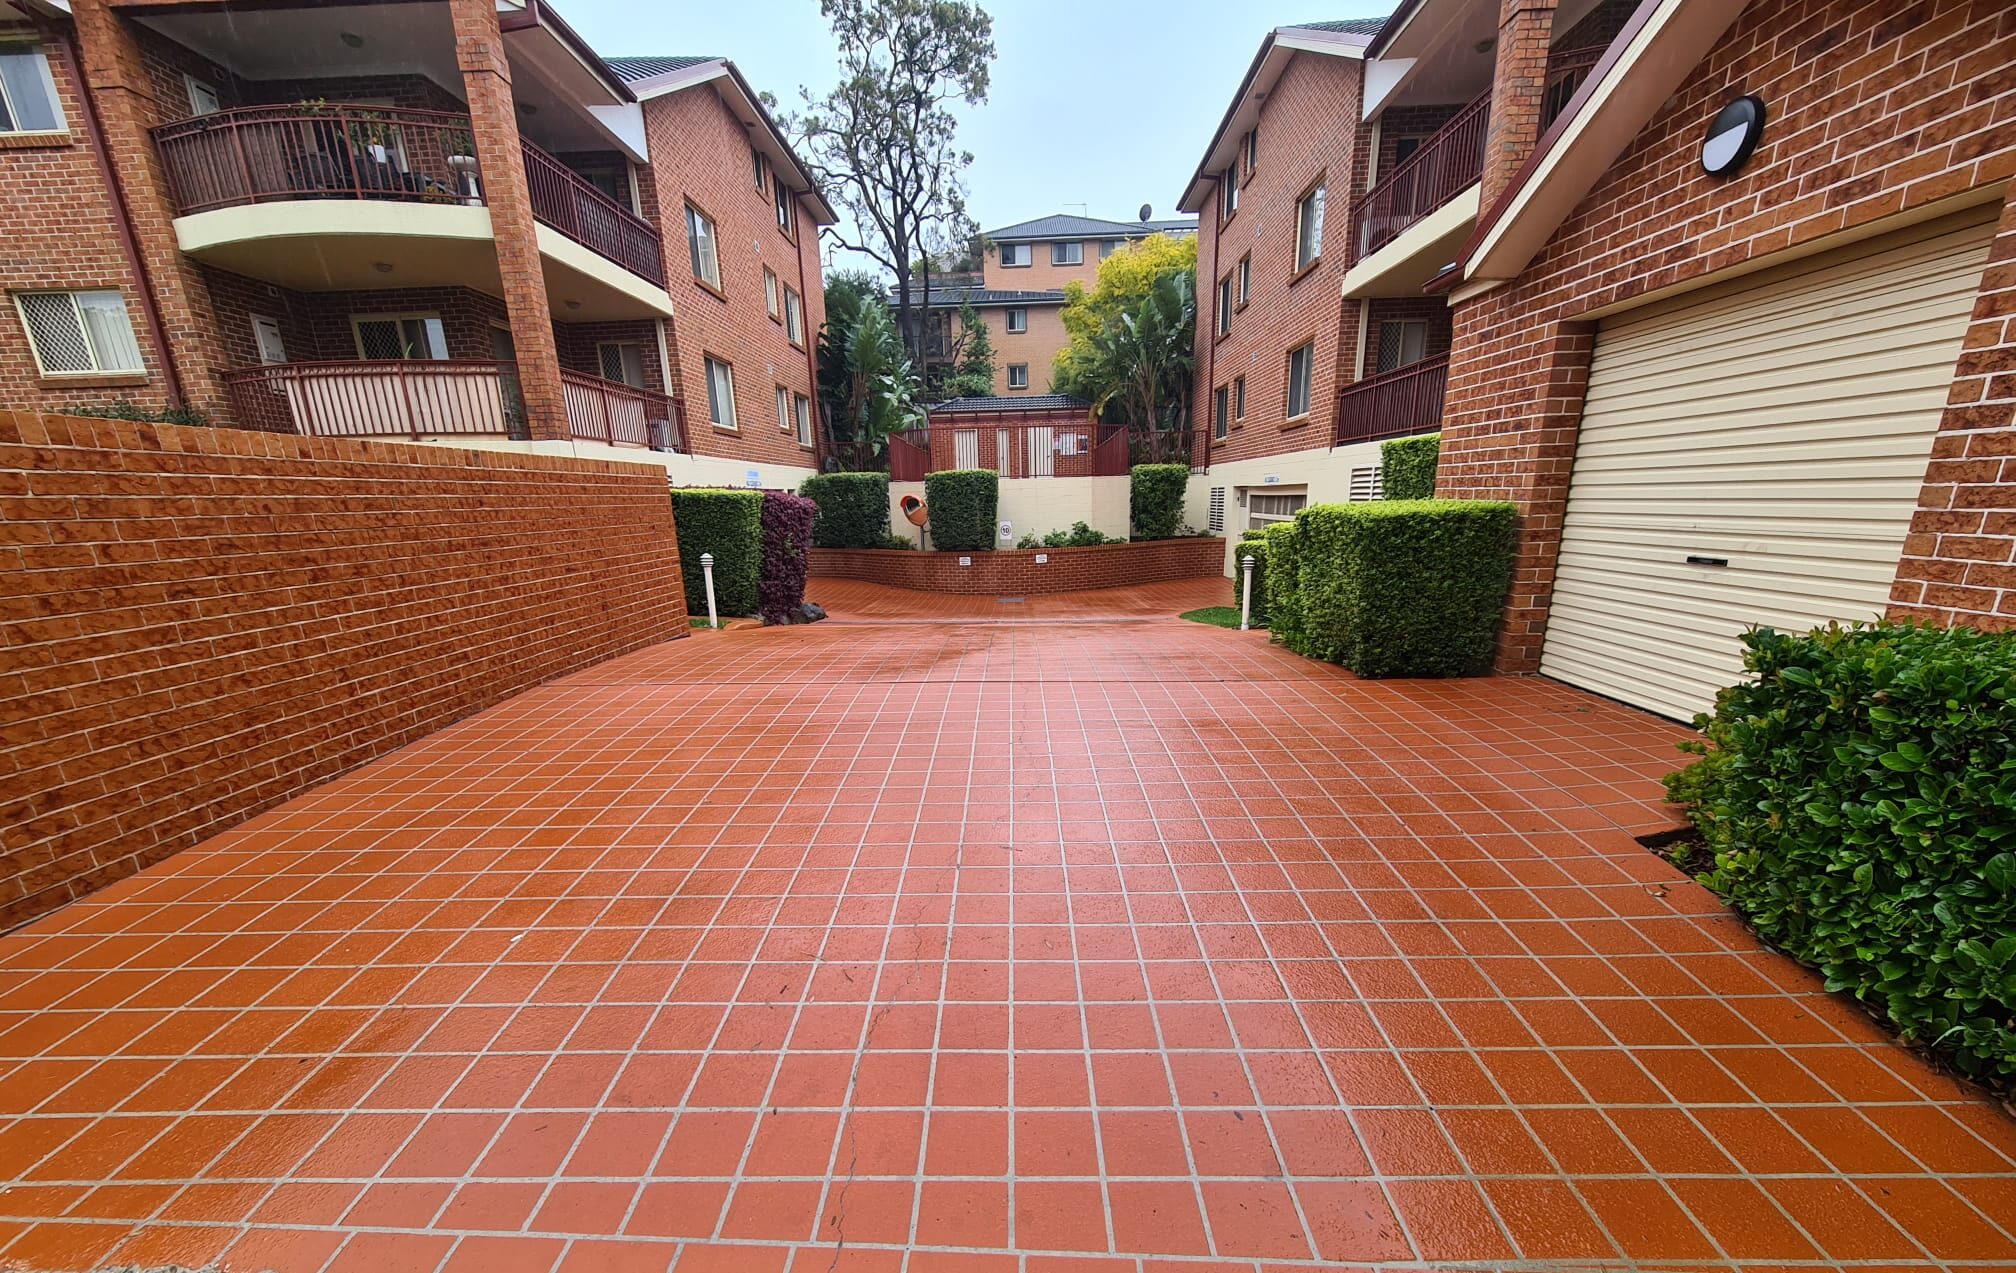 Driveway Cleaning Services Sydney | Pete's Pressure Cleaning